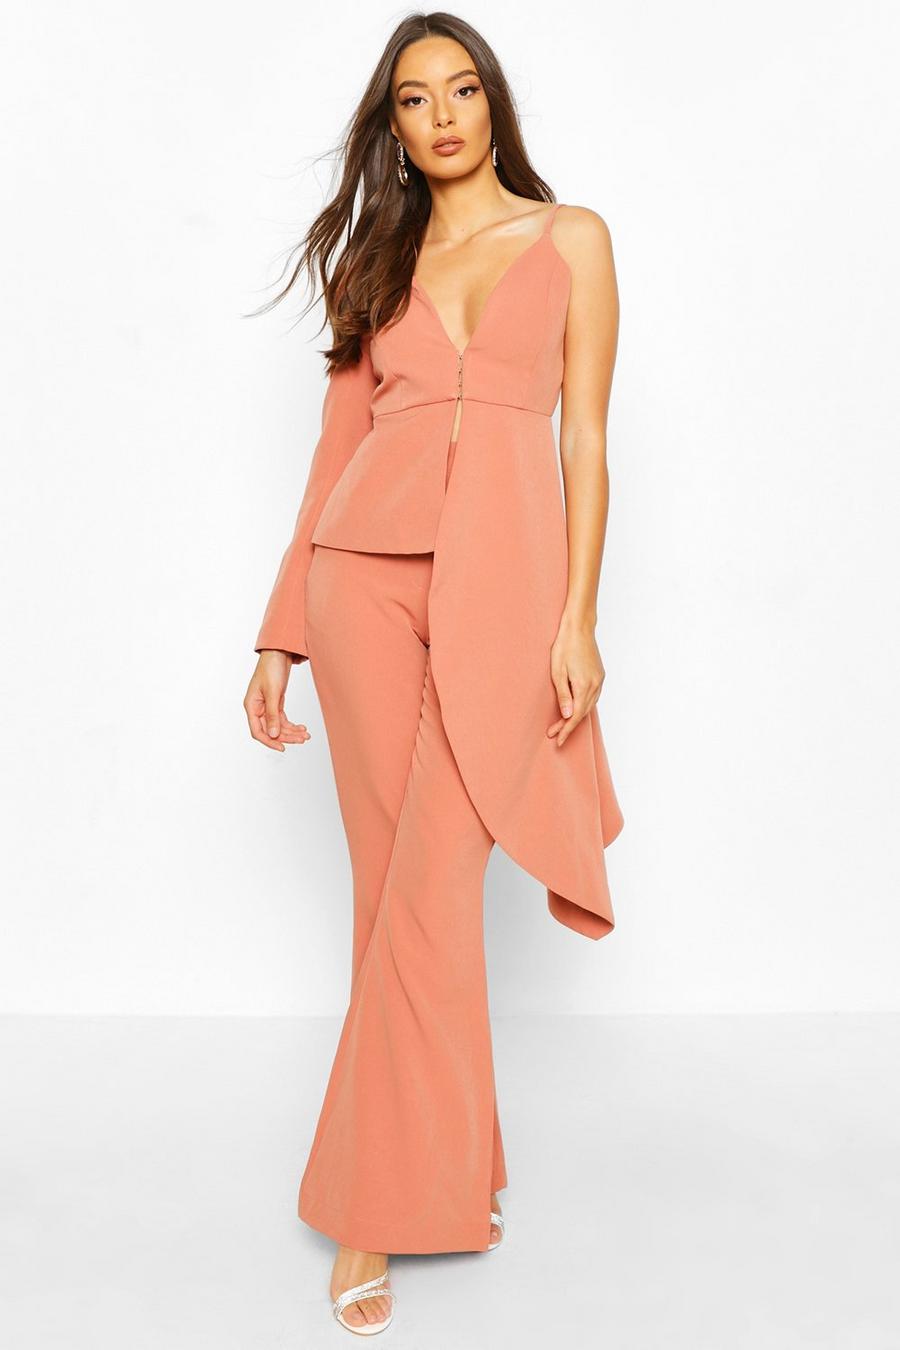 Apricot nude Boohoo Occasion Waterfall One Shoulder Blazer